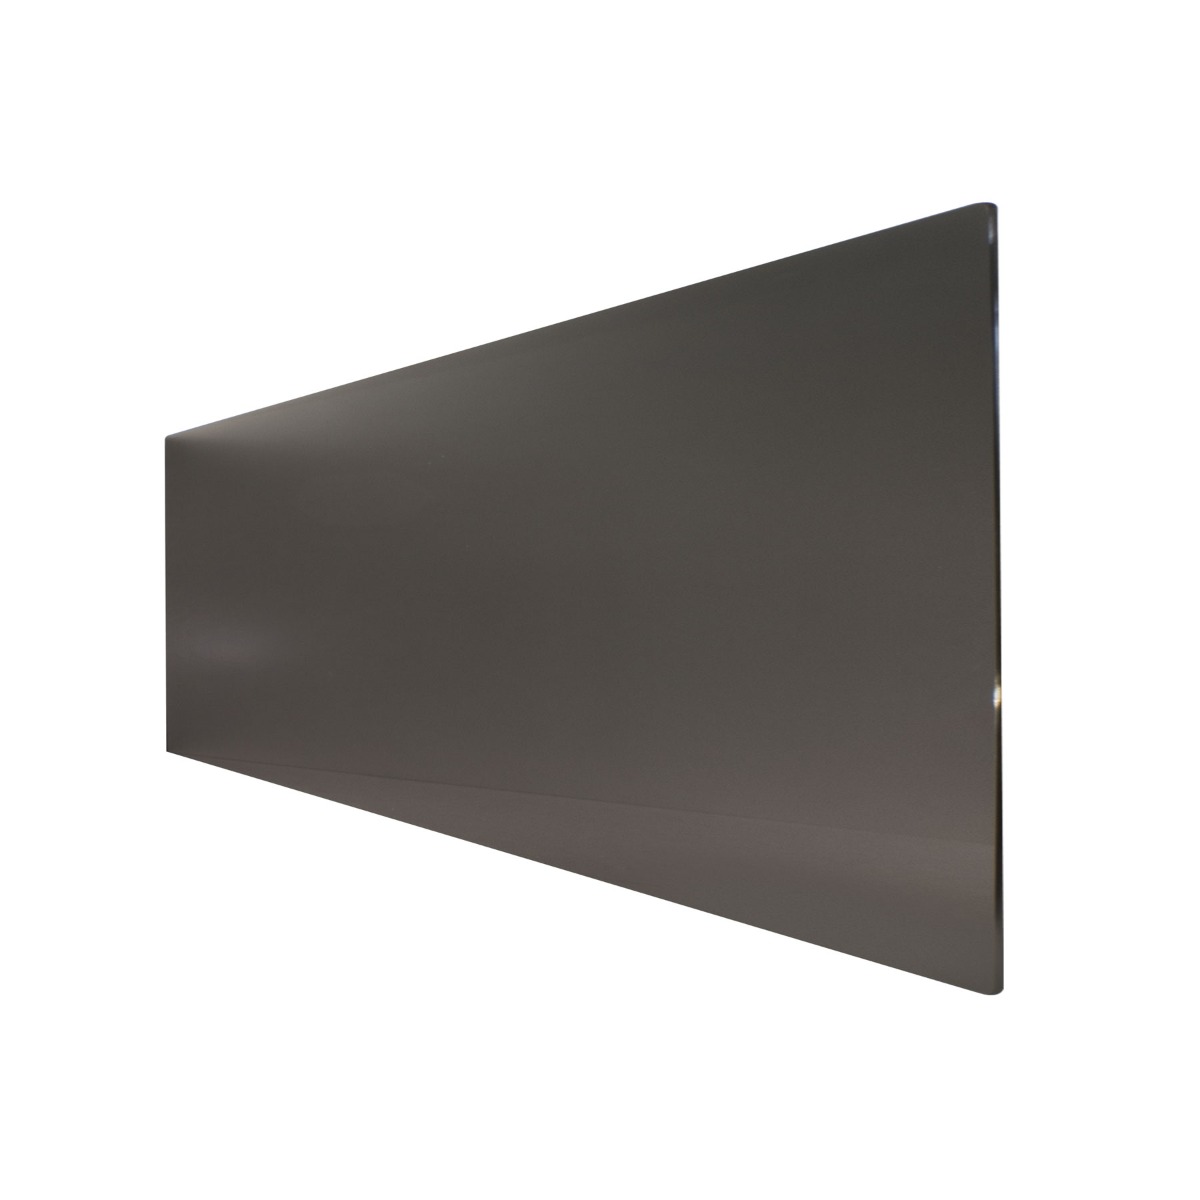 Technotherm ISP Design Glass Infrared Heating Panel - Black 500w (1350 x 454mm)